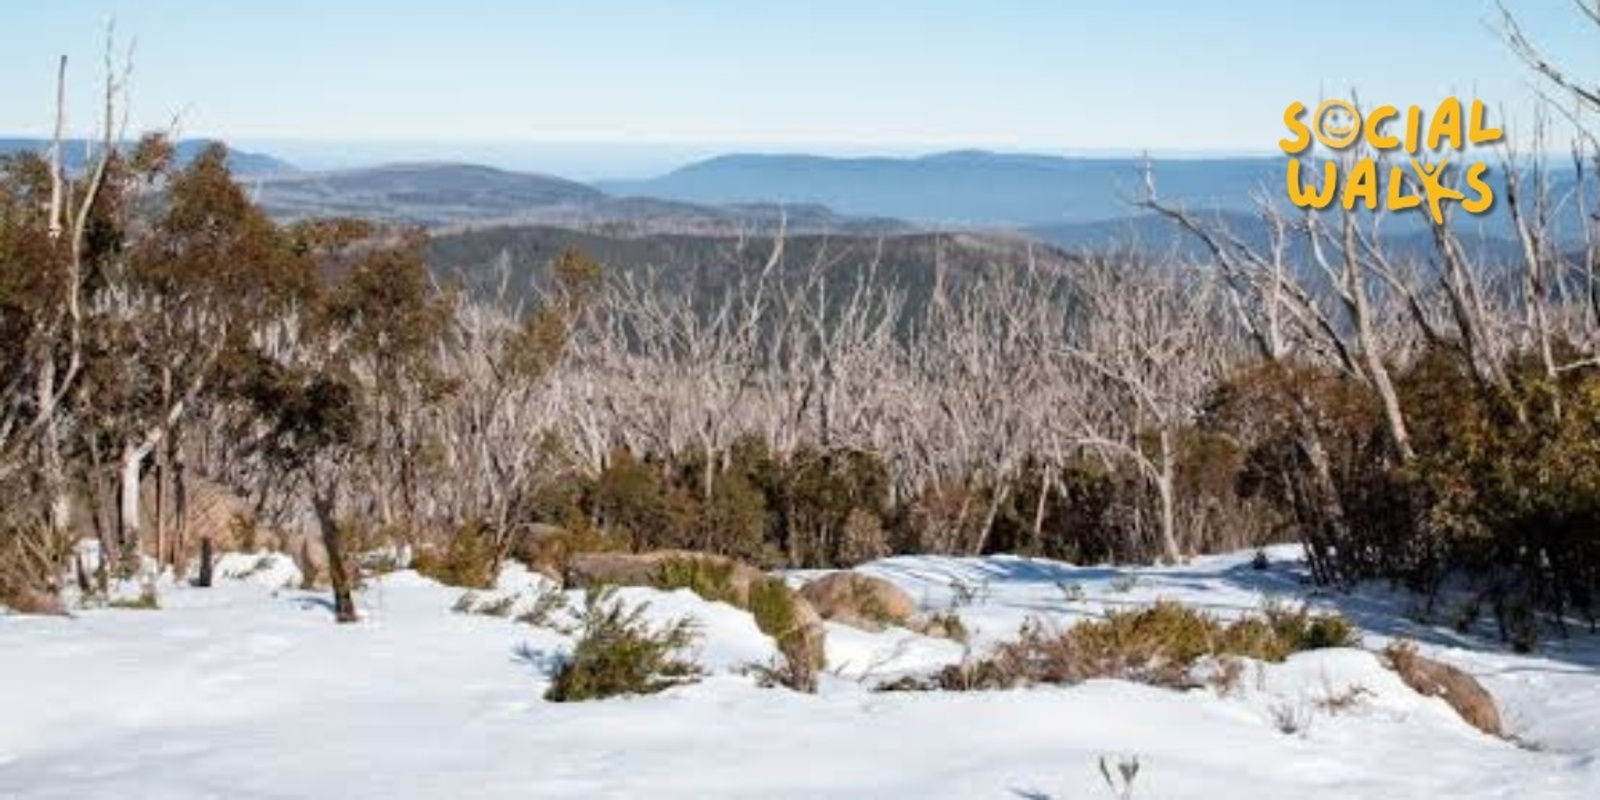 Banner image for Melbourne Social Walks - Lake Mountain Snow Trip + Summit Hike - Moderate 5km